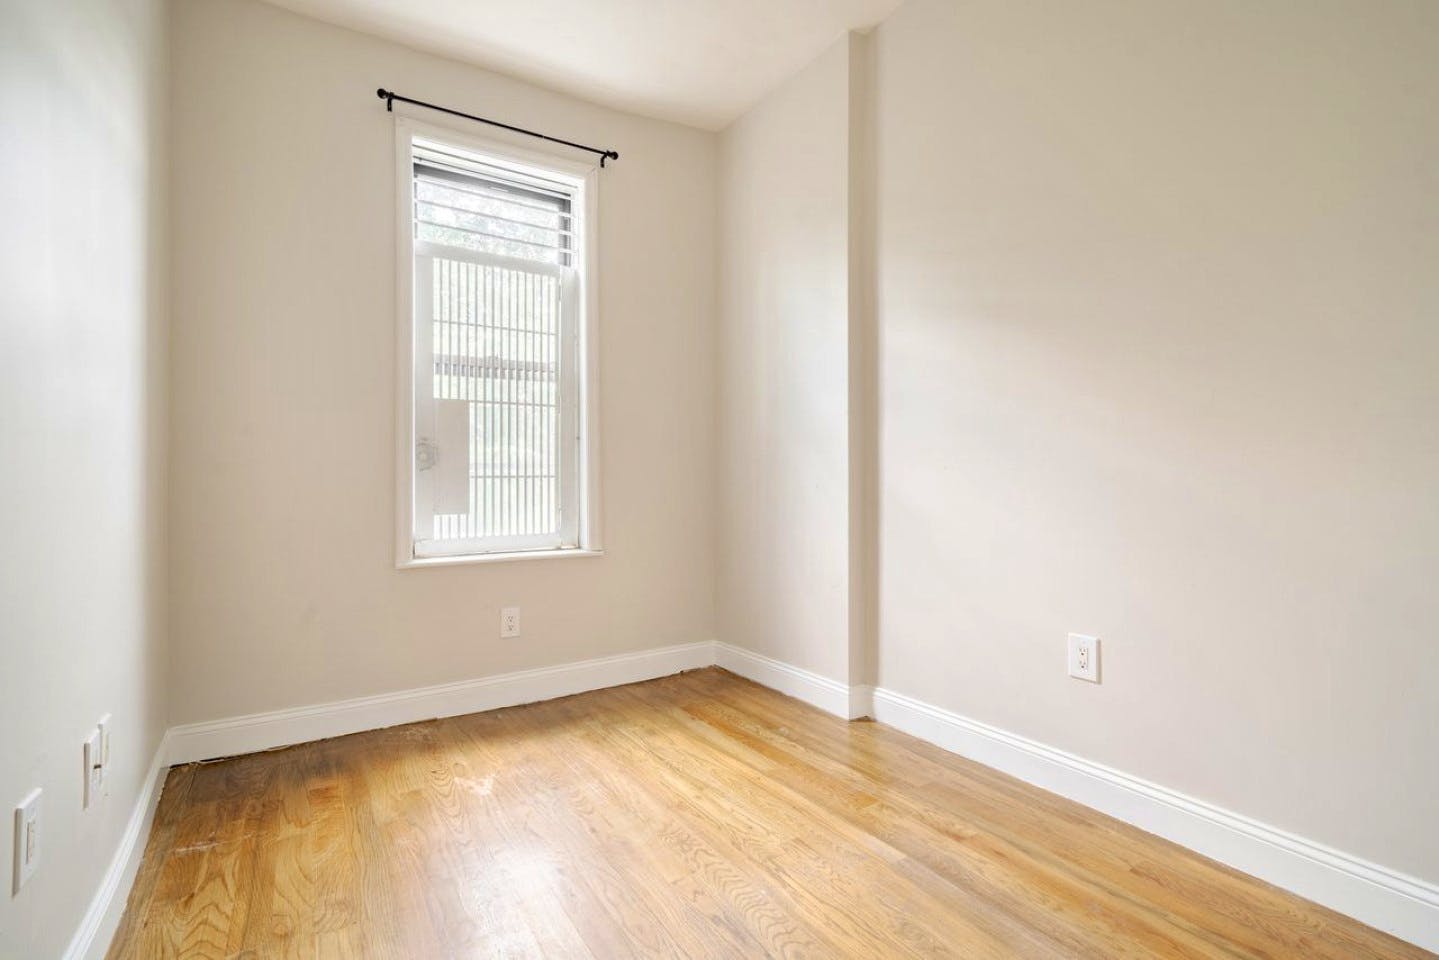 Gorgeous Stunning Apt. close to Convenience Stores